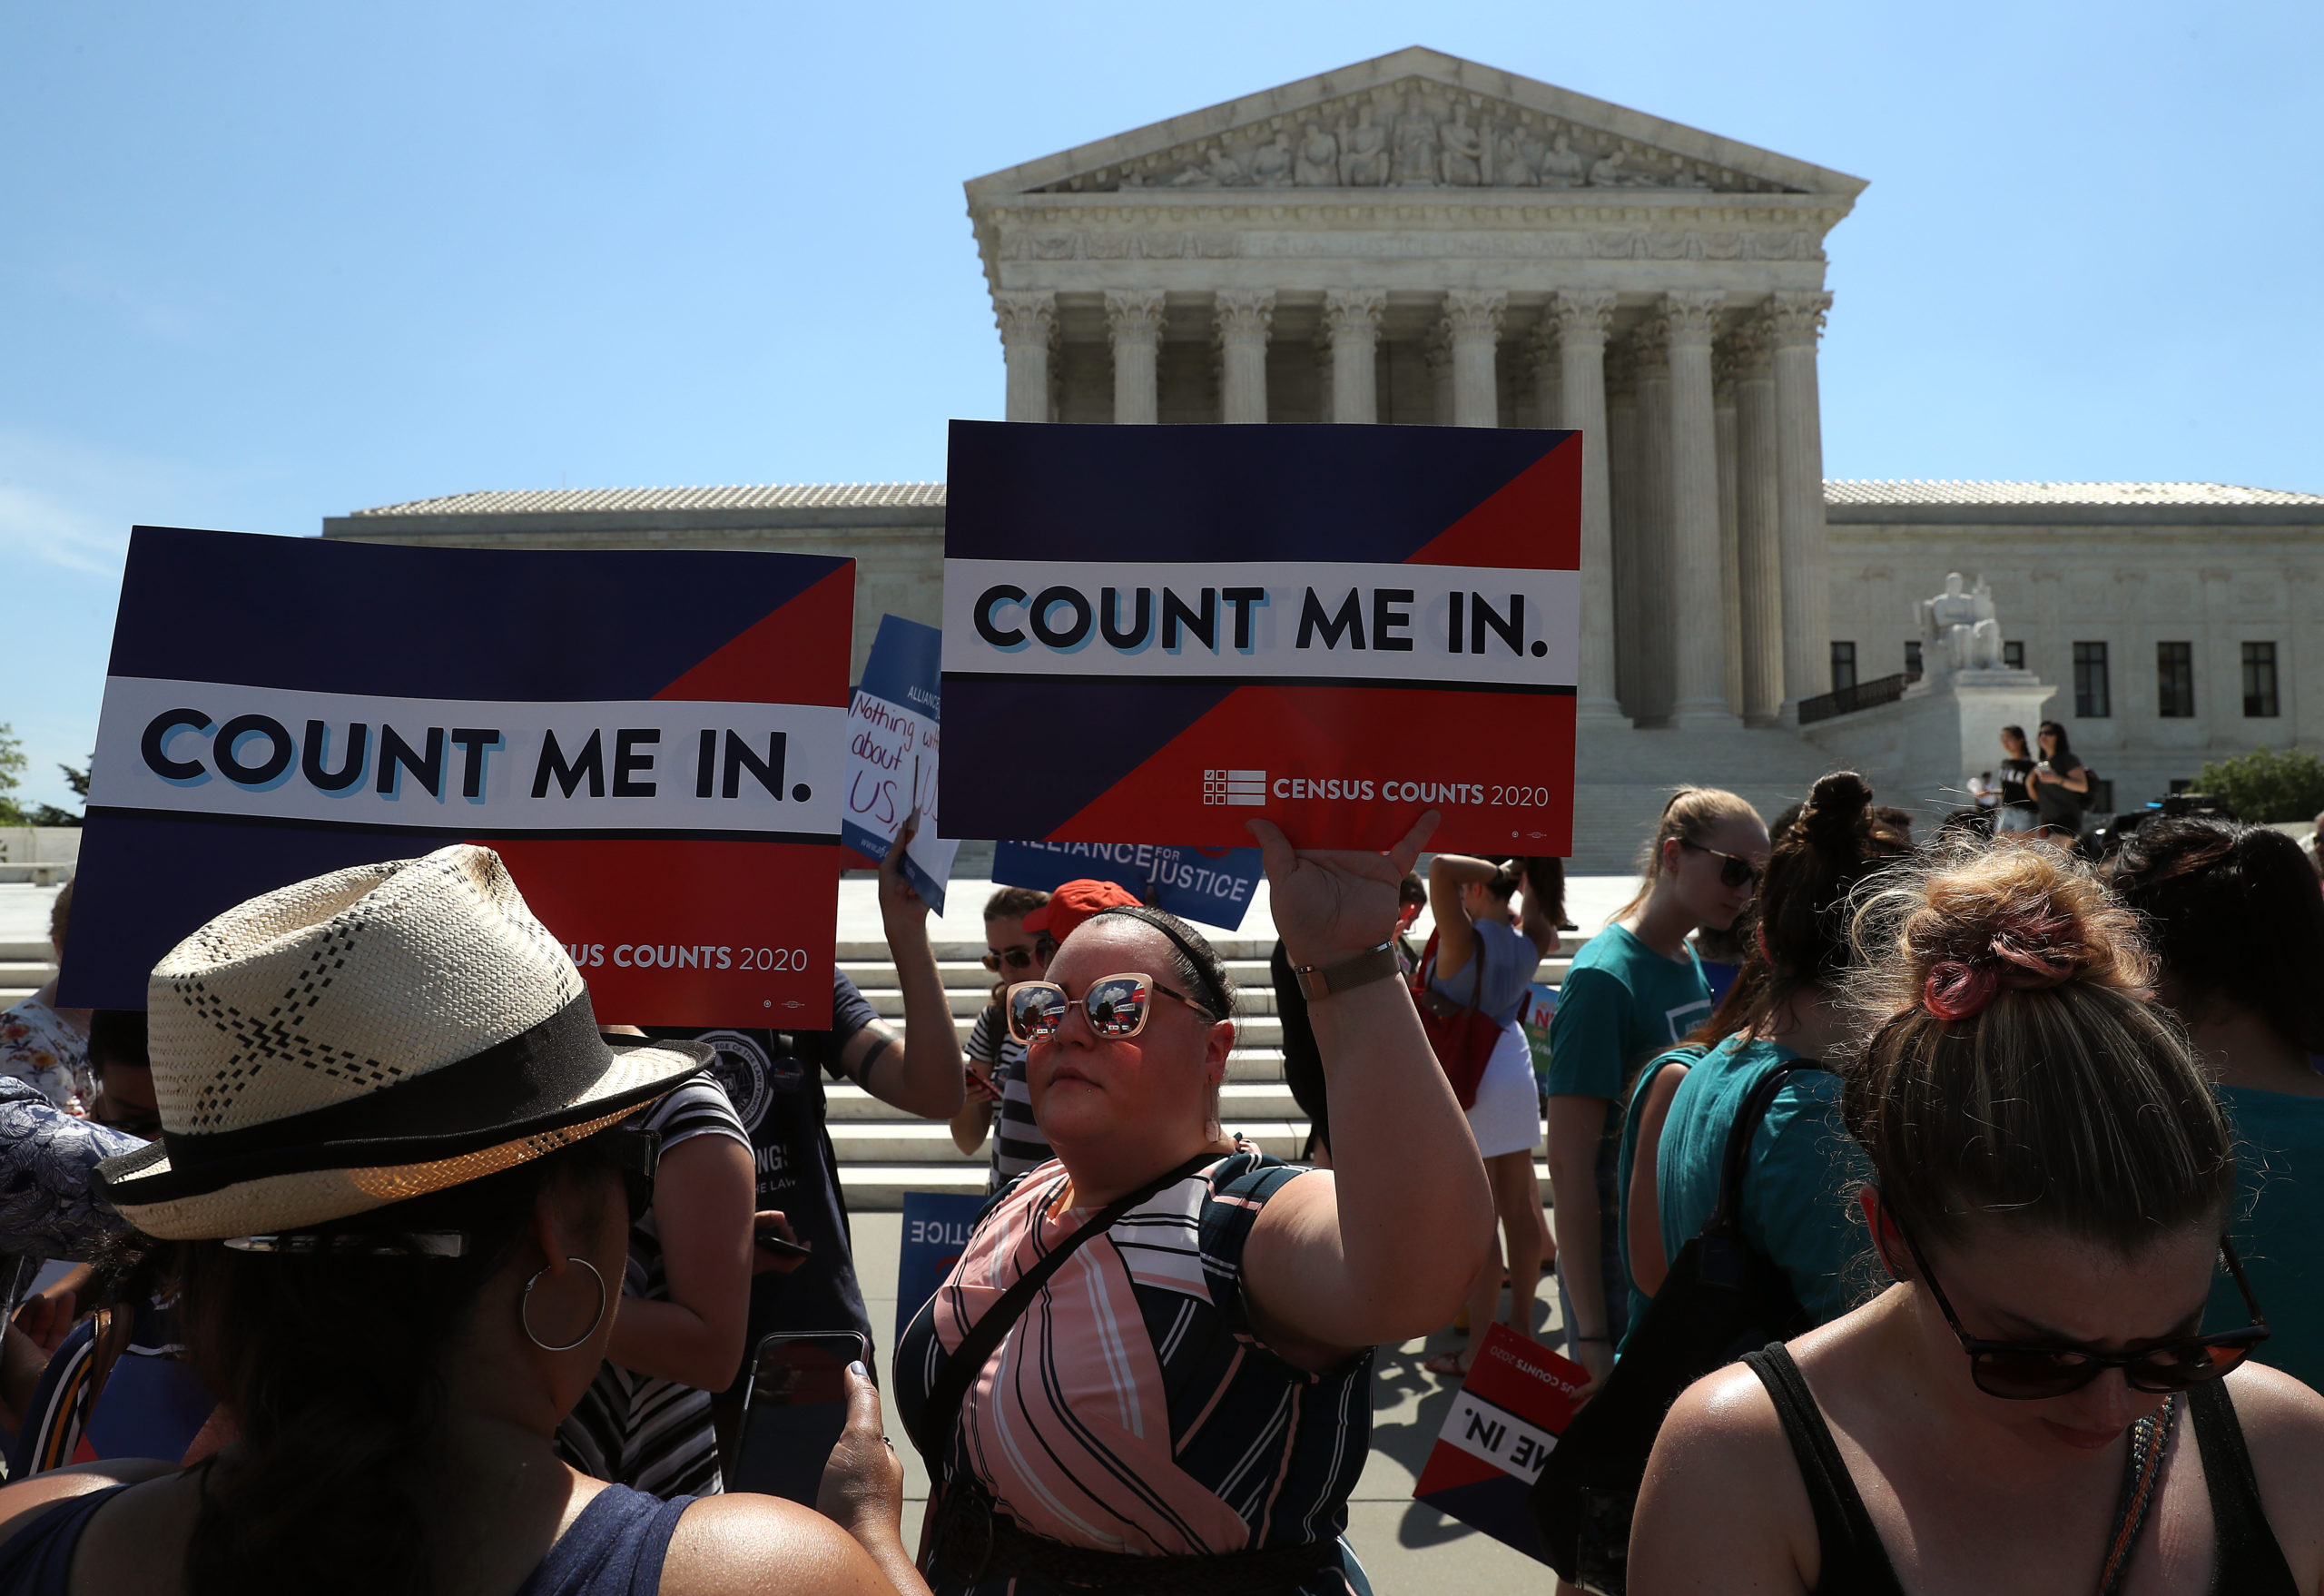 WASHINGTON, DC - JUNE 27: People gather in in front of the U.S. Supreme Court as decisions are handed down on June 27, 2019 in Washington, DC. The high court blocked a citizenship question from being added to the 2020 census for now, and in another decision ruled that the Constitution does not bar partisan gerrymandering. (Photo by Mark Wilson/Getty Images)